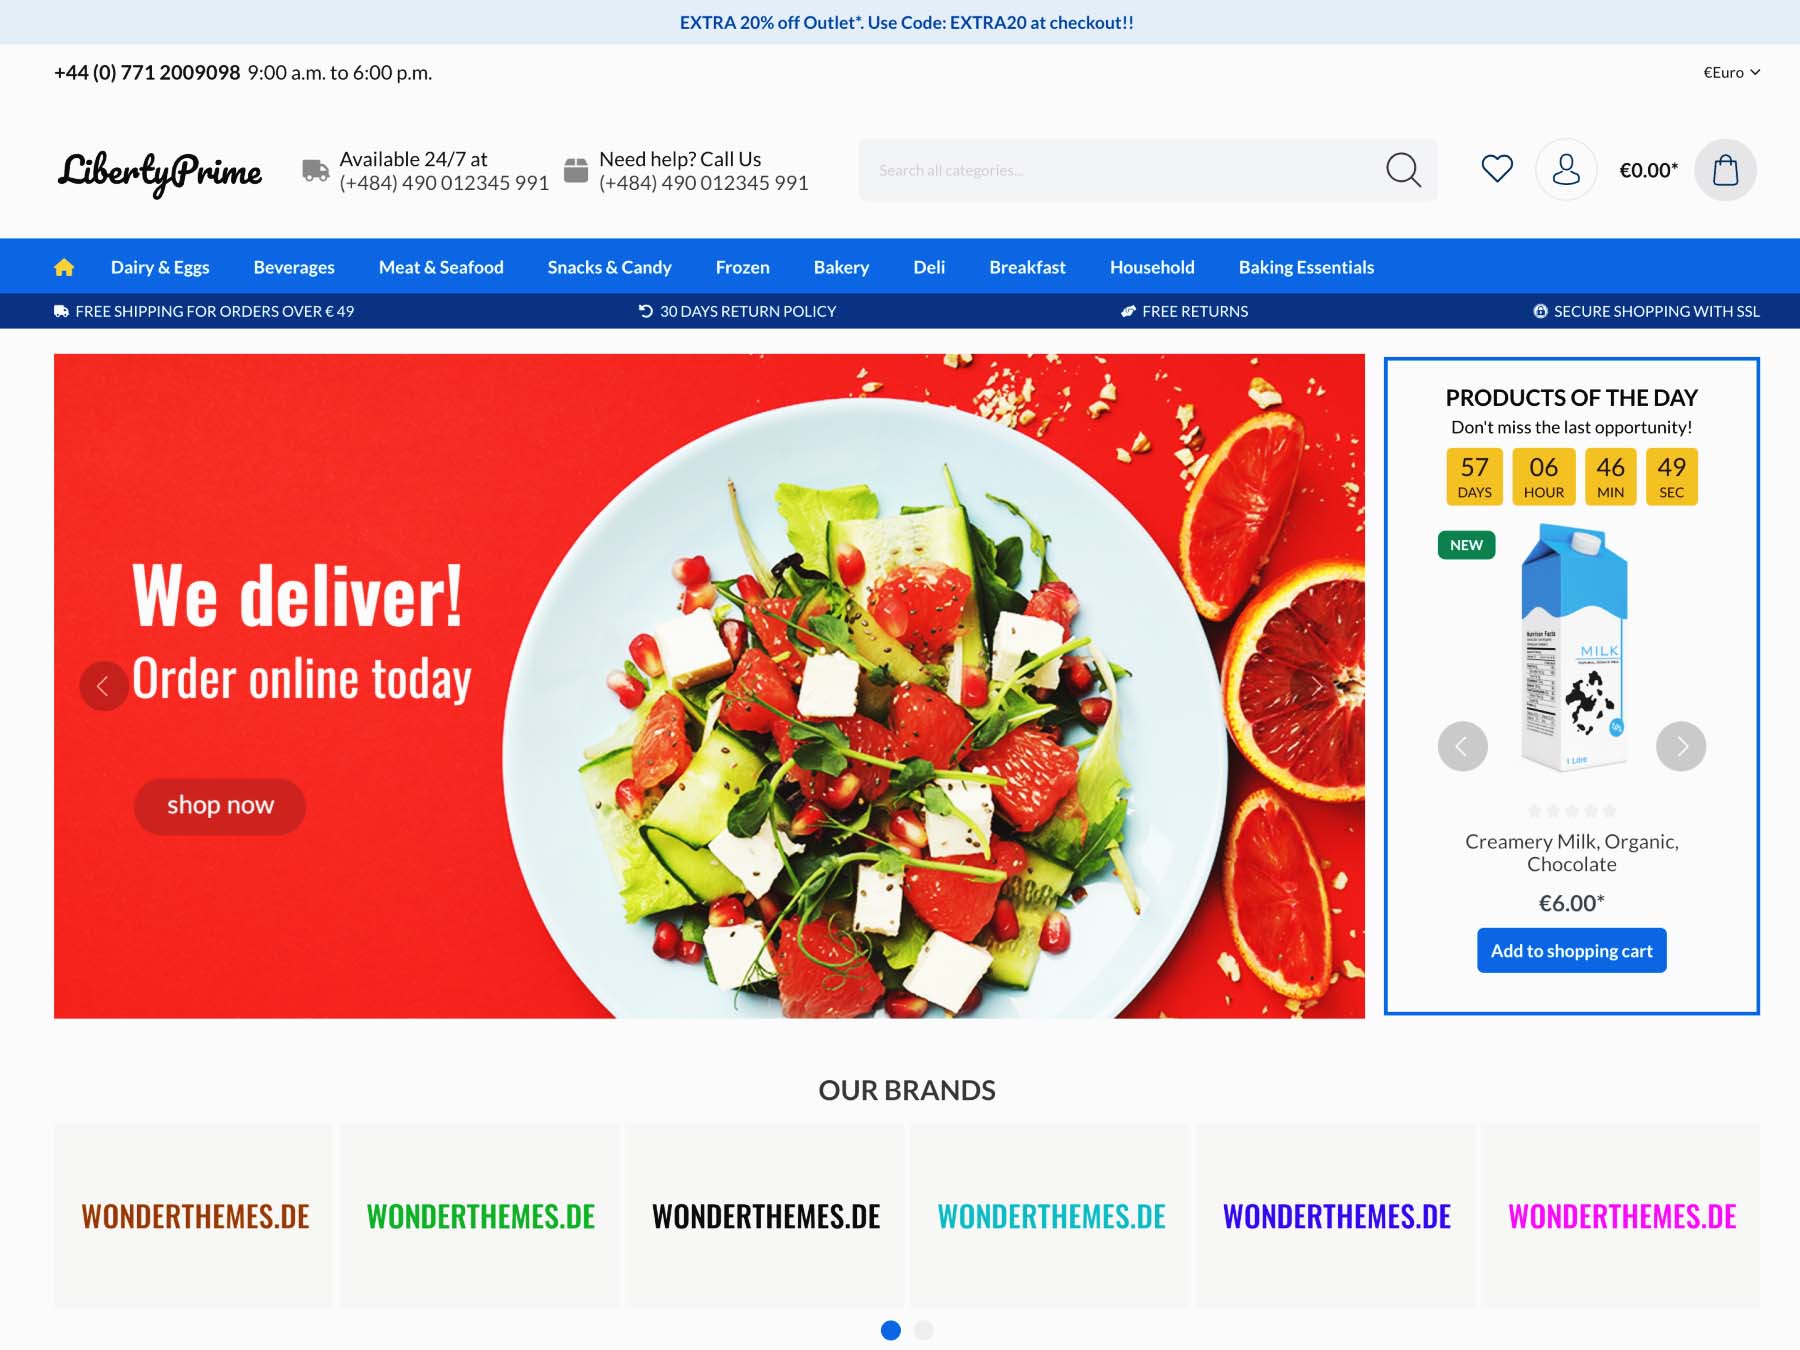 Liberty Prime Theme. An example of an online grocery store.